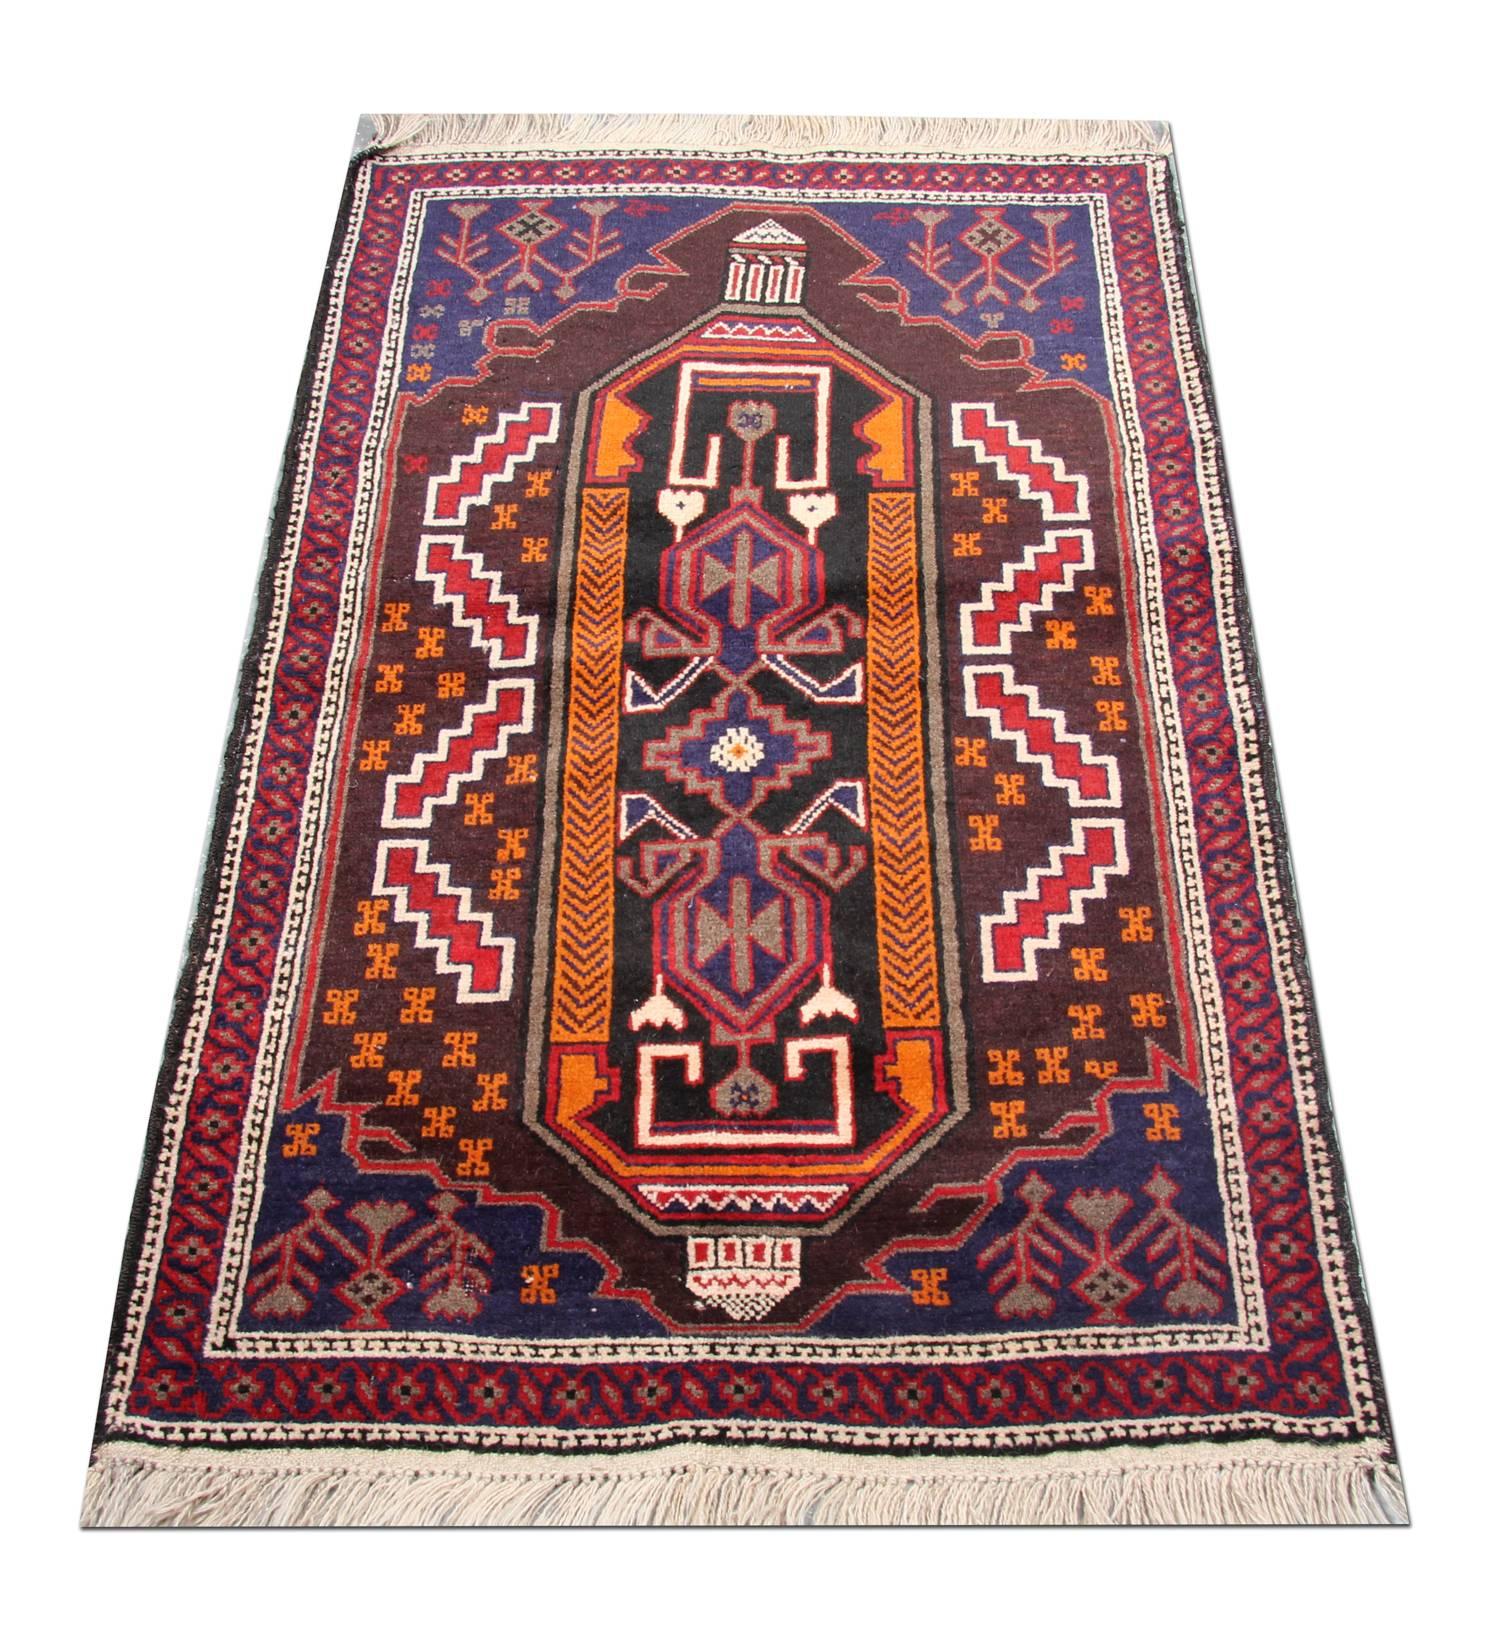 This piece was woven by hand in Afghanistan with a fine symmetrical design. The central pattern is a tribal design woven on a dark background with orange, red and white accent colors. Intricately woven with sophisticated patterns and emblems